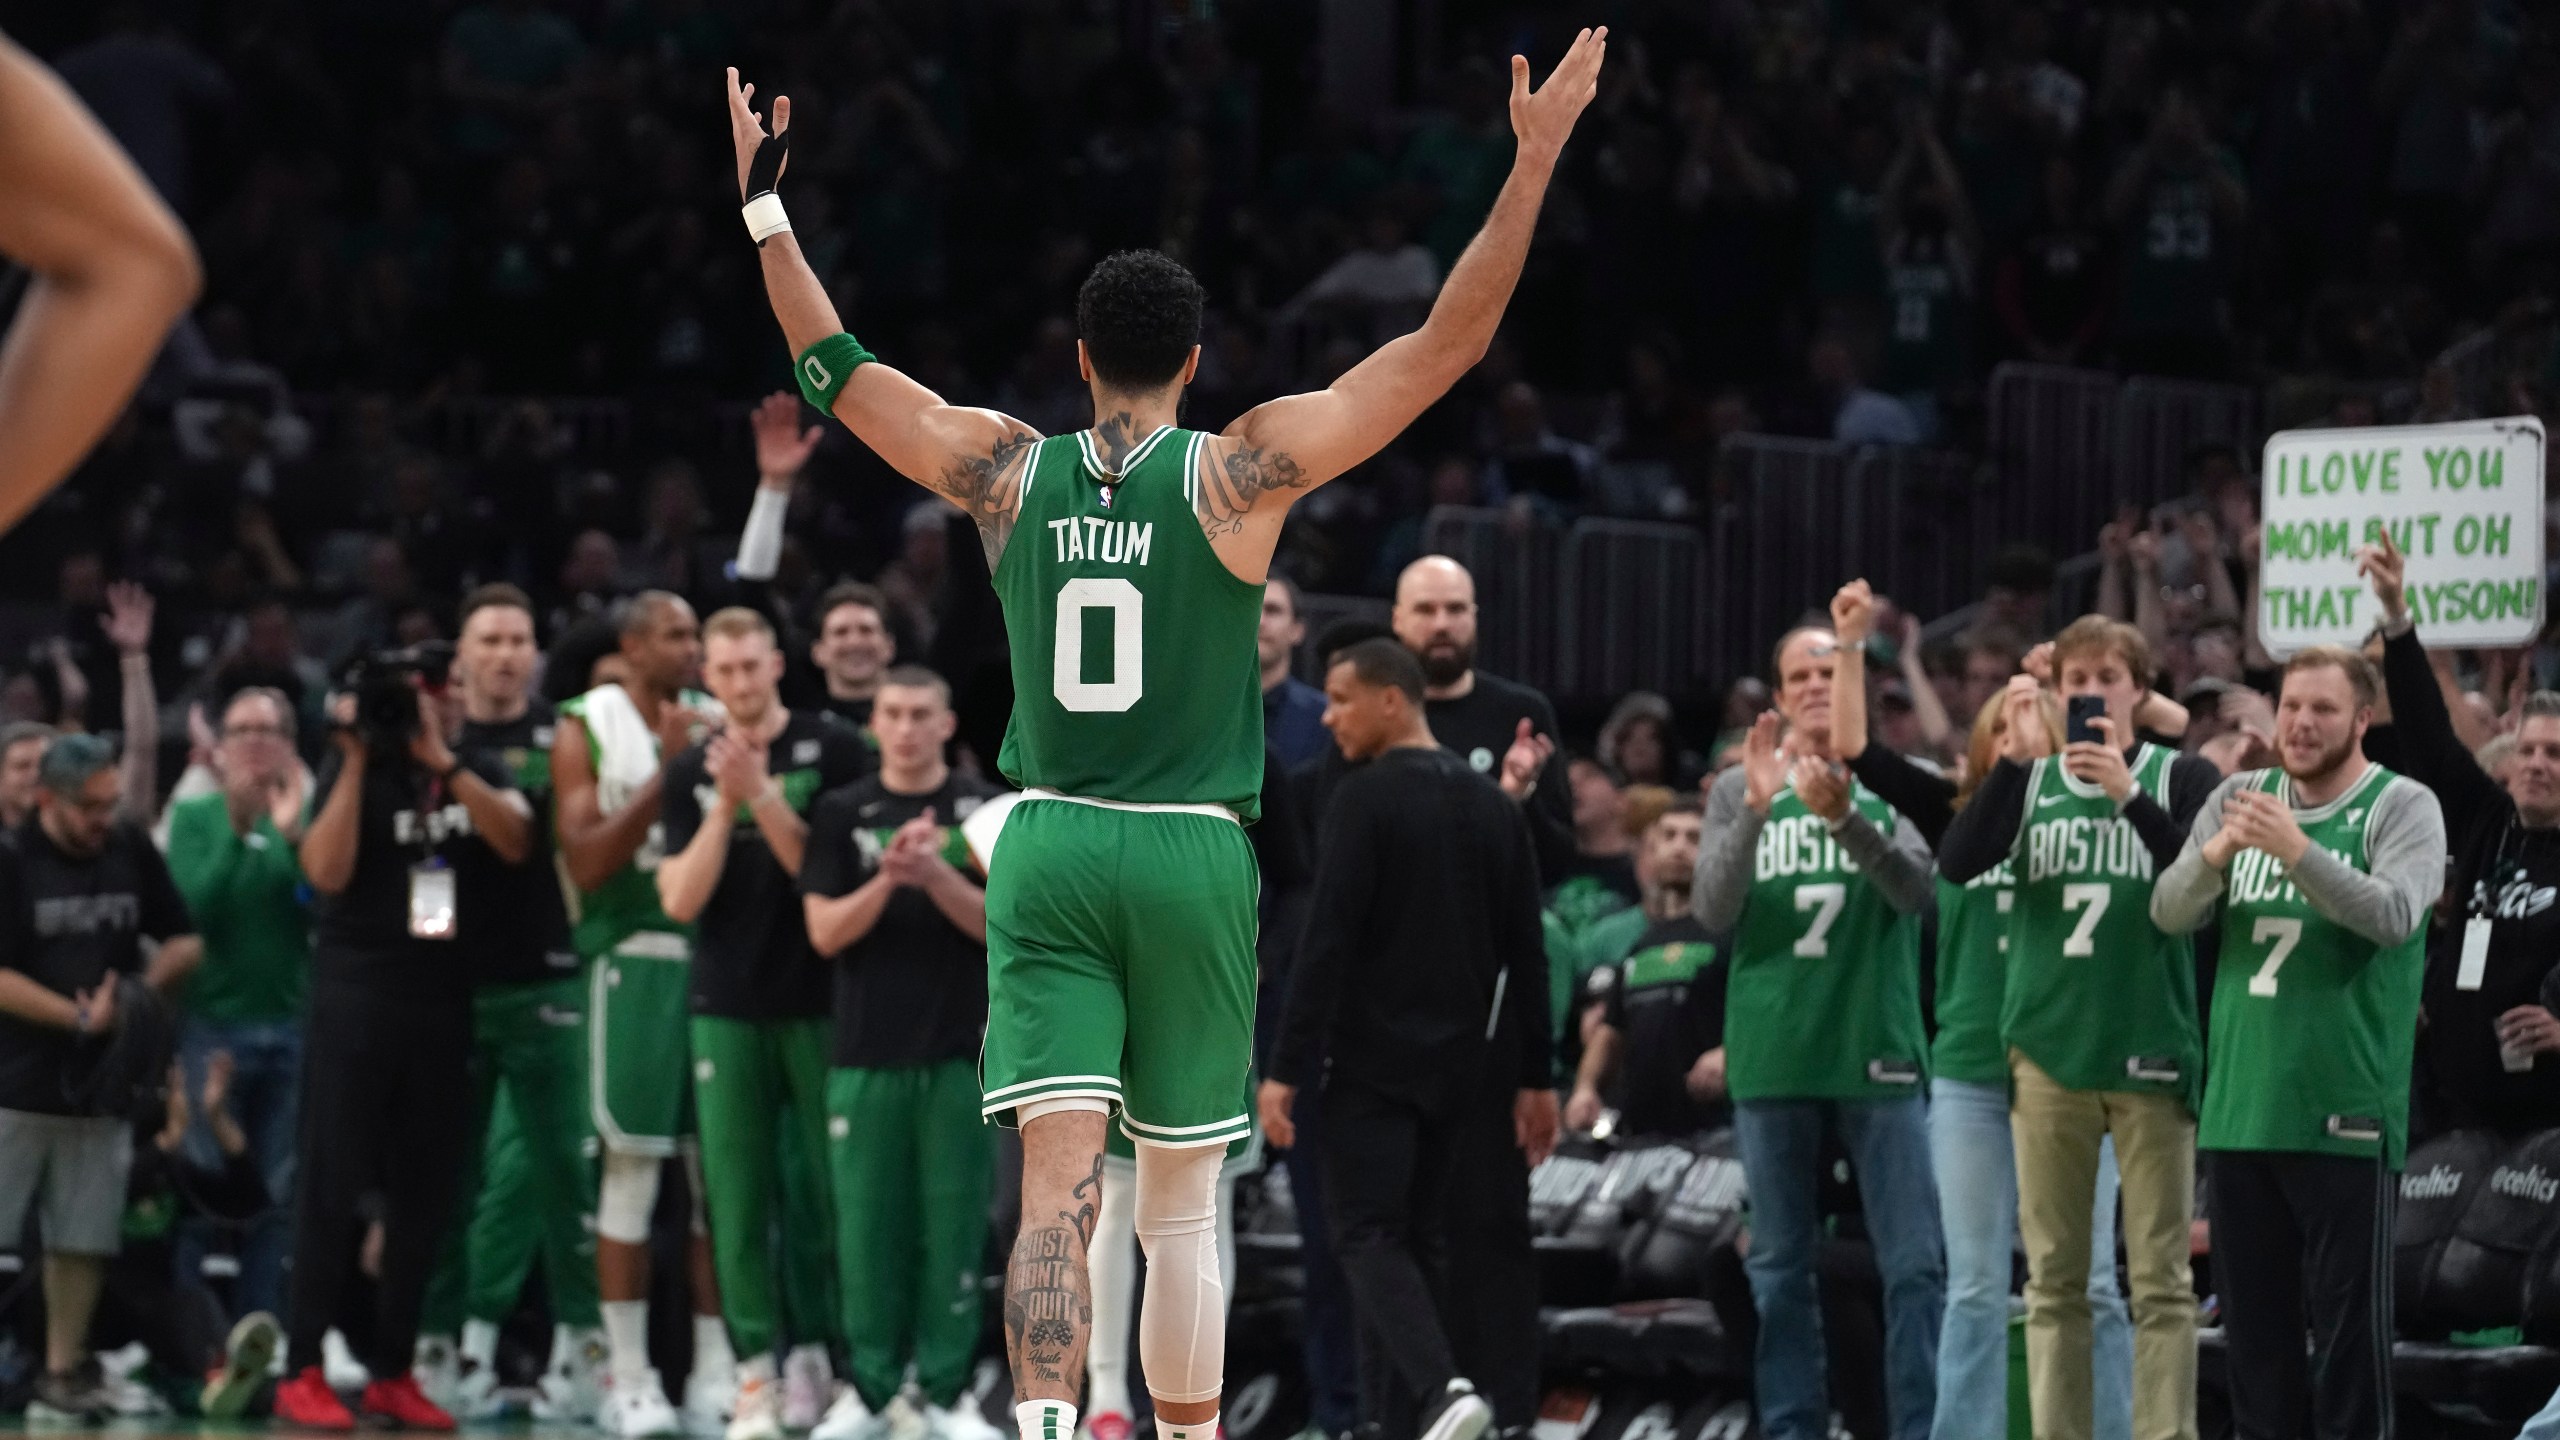 Boston Celtics forward Jayson Tatum (0) receives applause as he steps off the court near the end of Game 7 against the Philadelphia 76ers in the NBA basketball Eastern Conference semifinal playoff series, Sunday, May 14, 2023, in Boston. (AP Photo/Steven Senne)